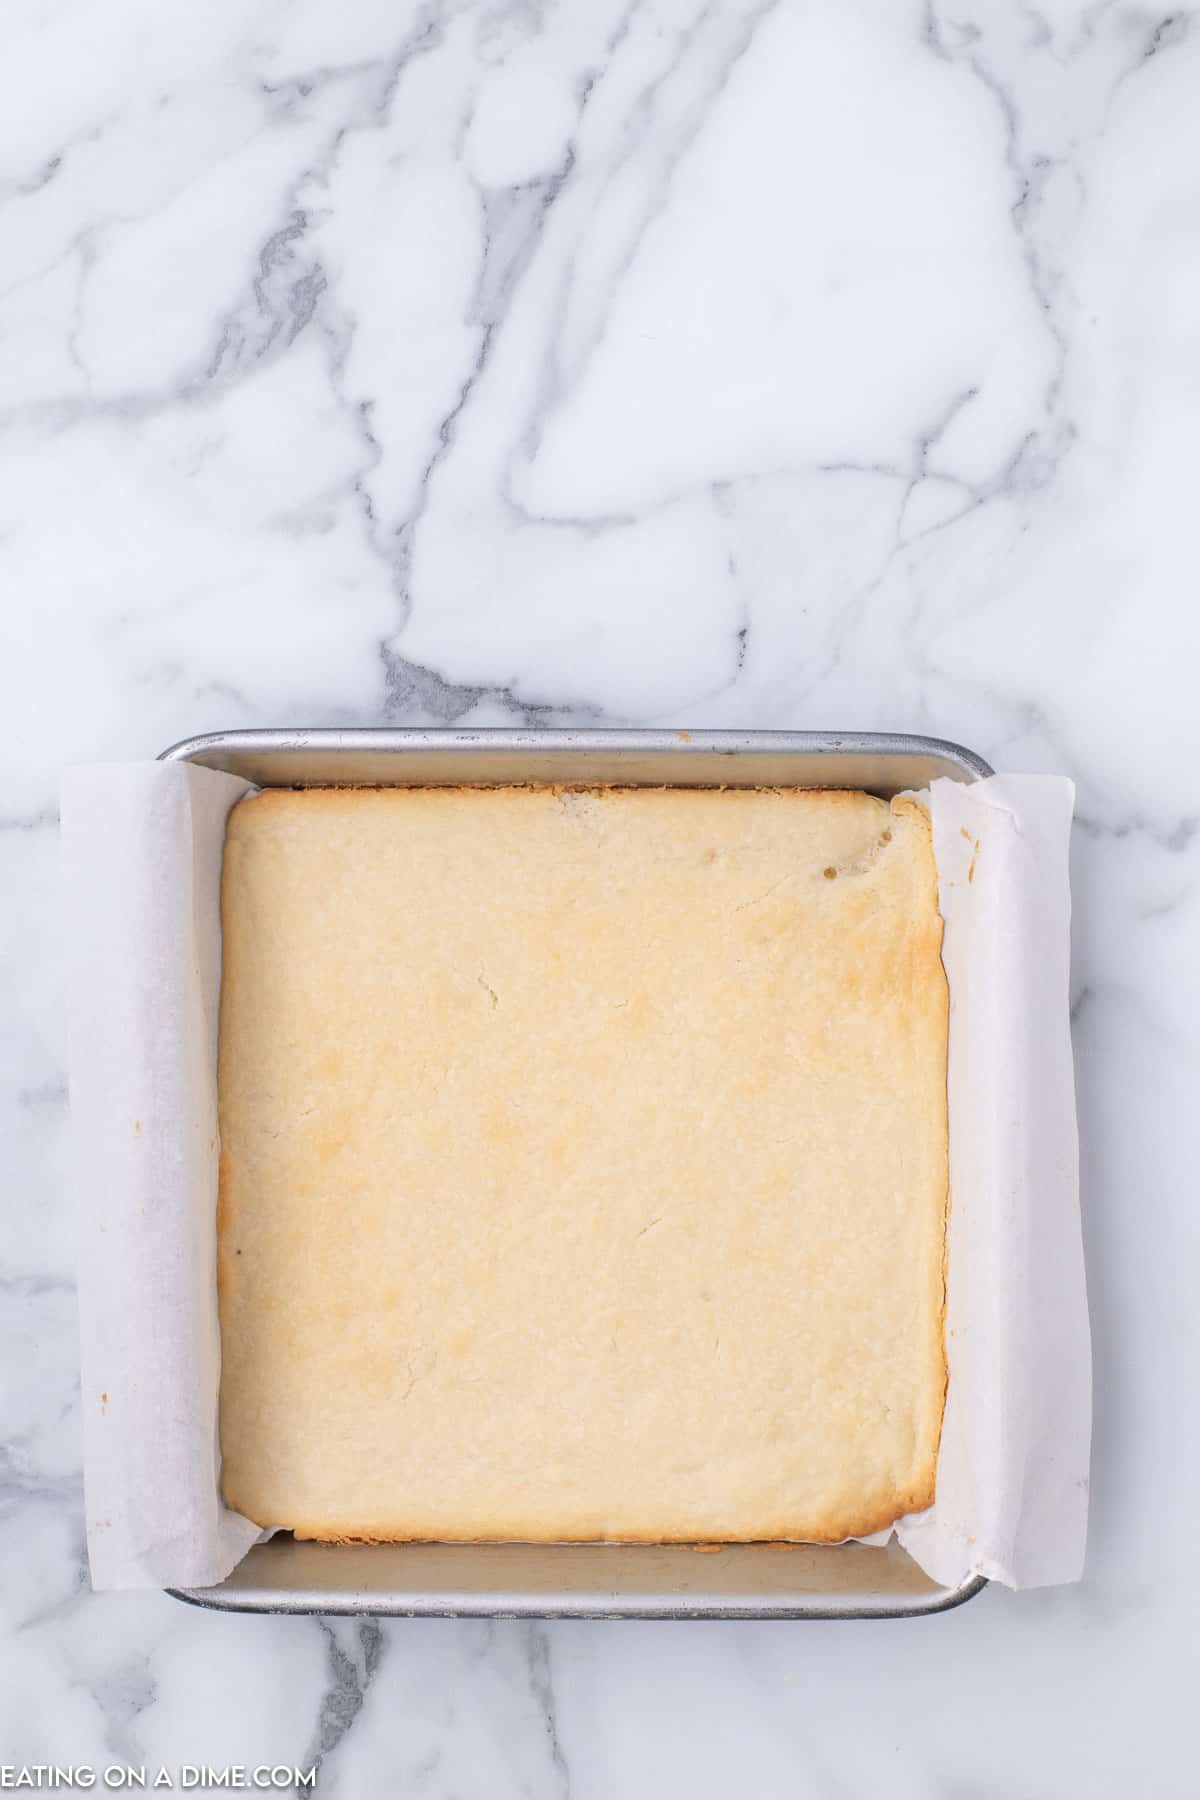 Baked shortbread crust in a baking dish lined with parchment paper